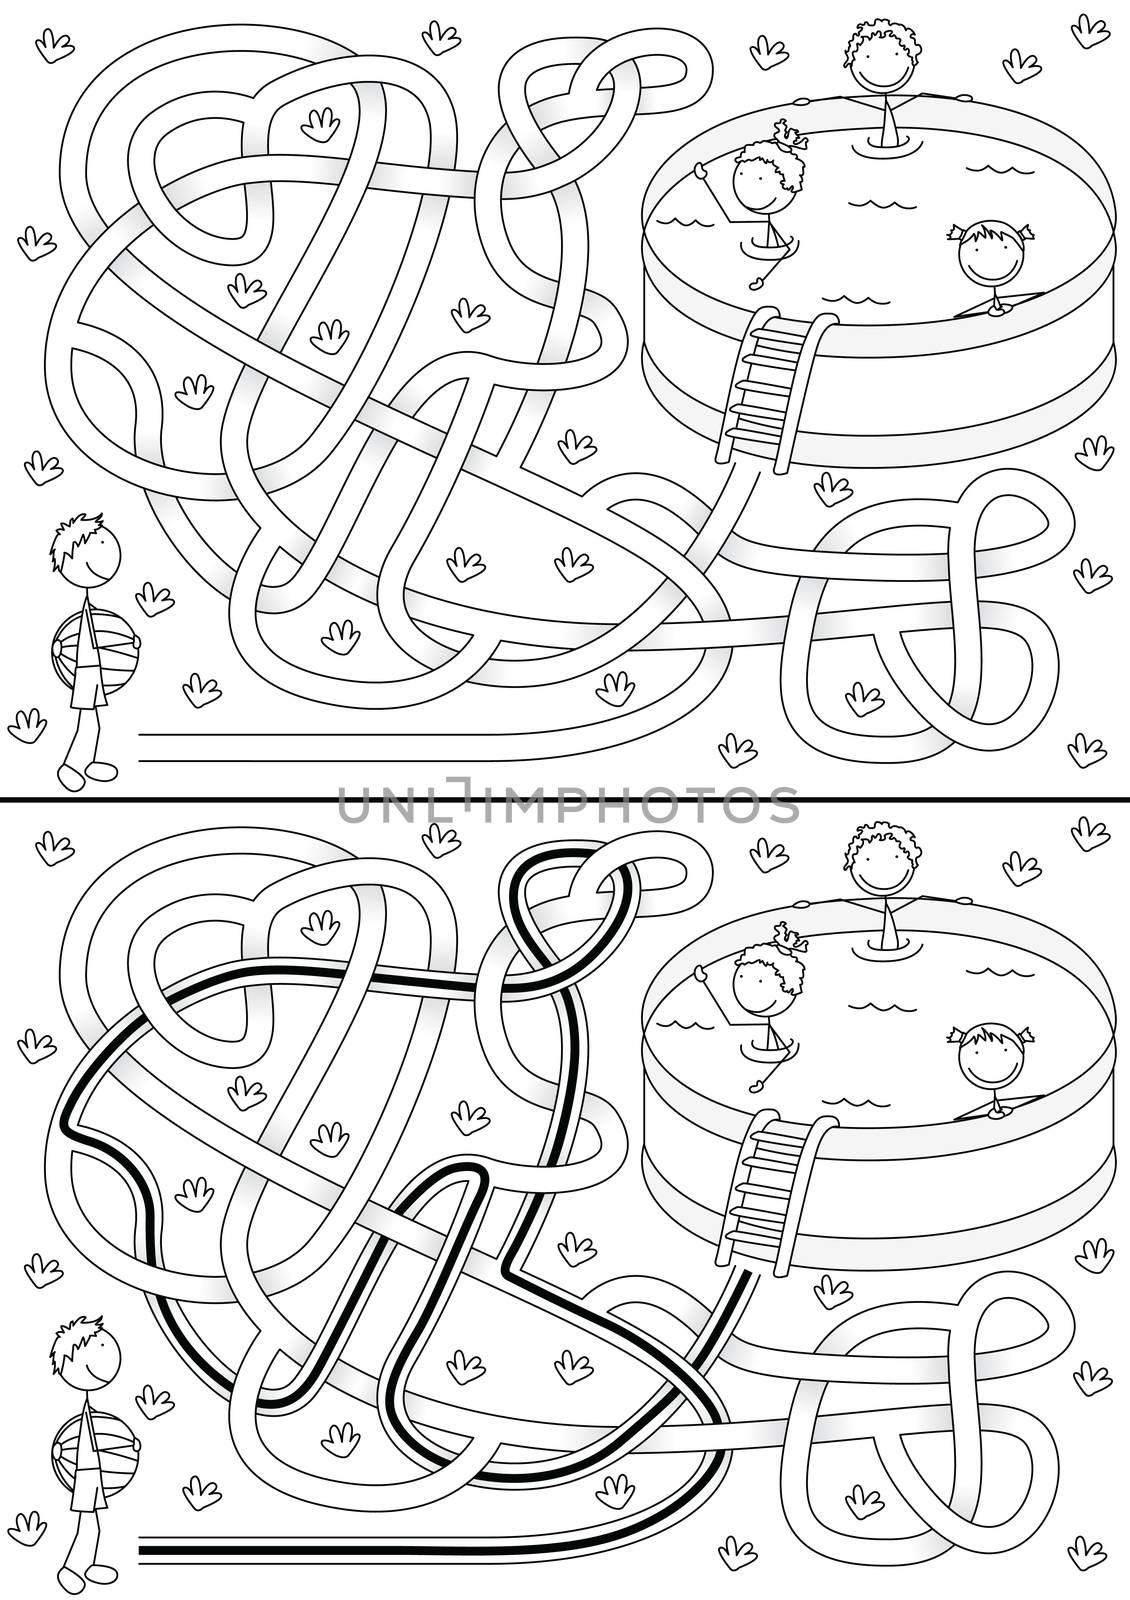 Summer maze for kids with a solution in black and white